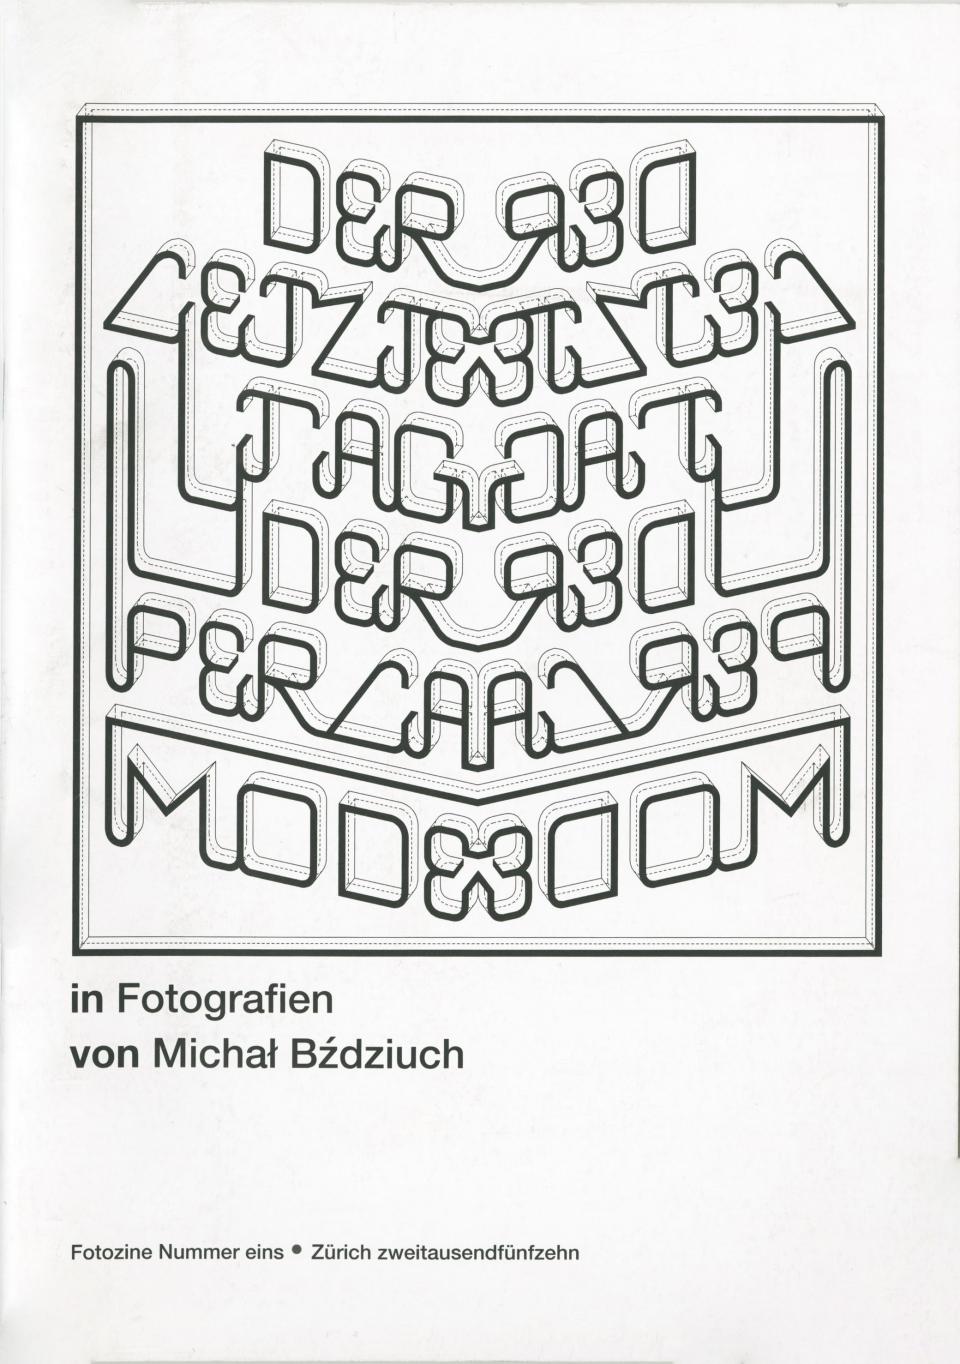 Book cover with text